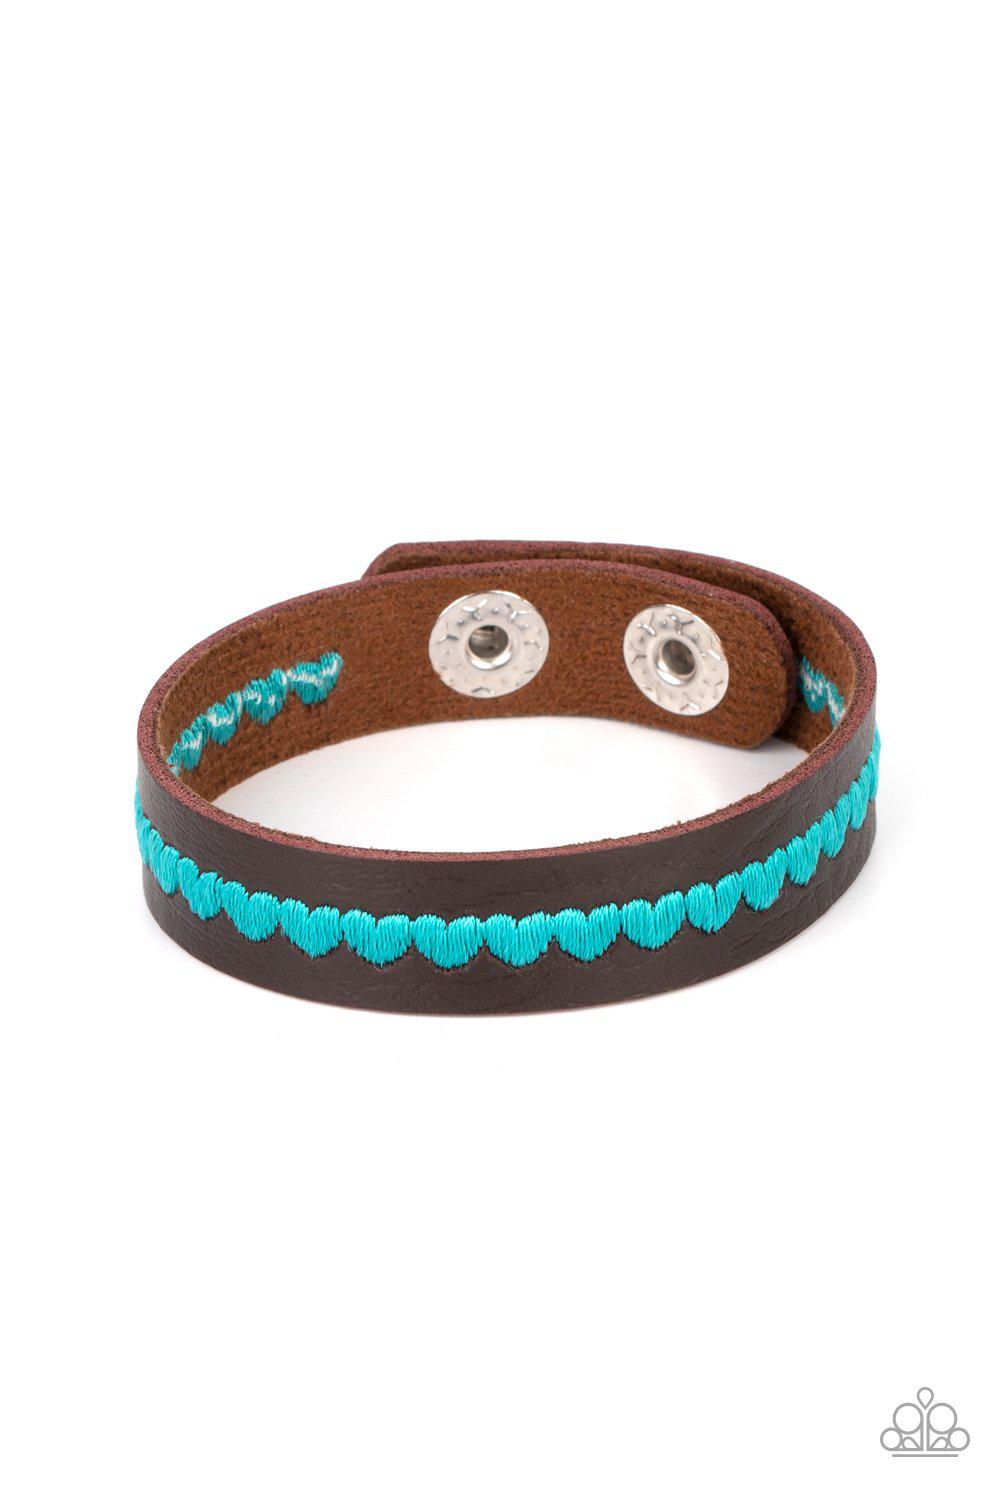 Made With Love Blue Heart and Brown Leather Urban Wrap Snap Bracelet - Paparazzi Accessories- lightbox - CarasShop.com - $5 Jewelry by Cara Jewels